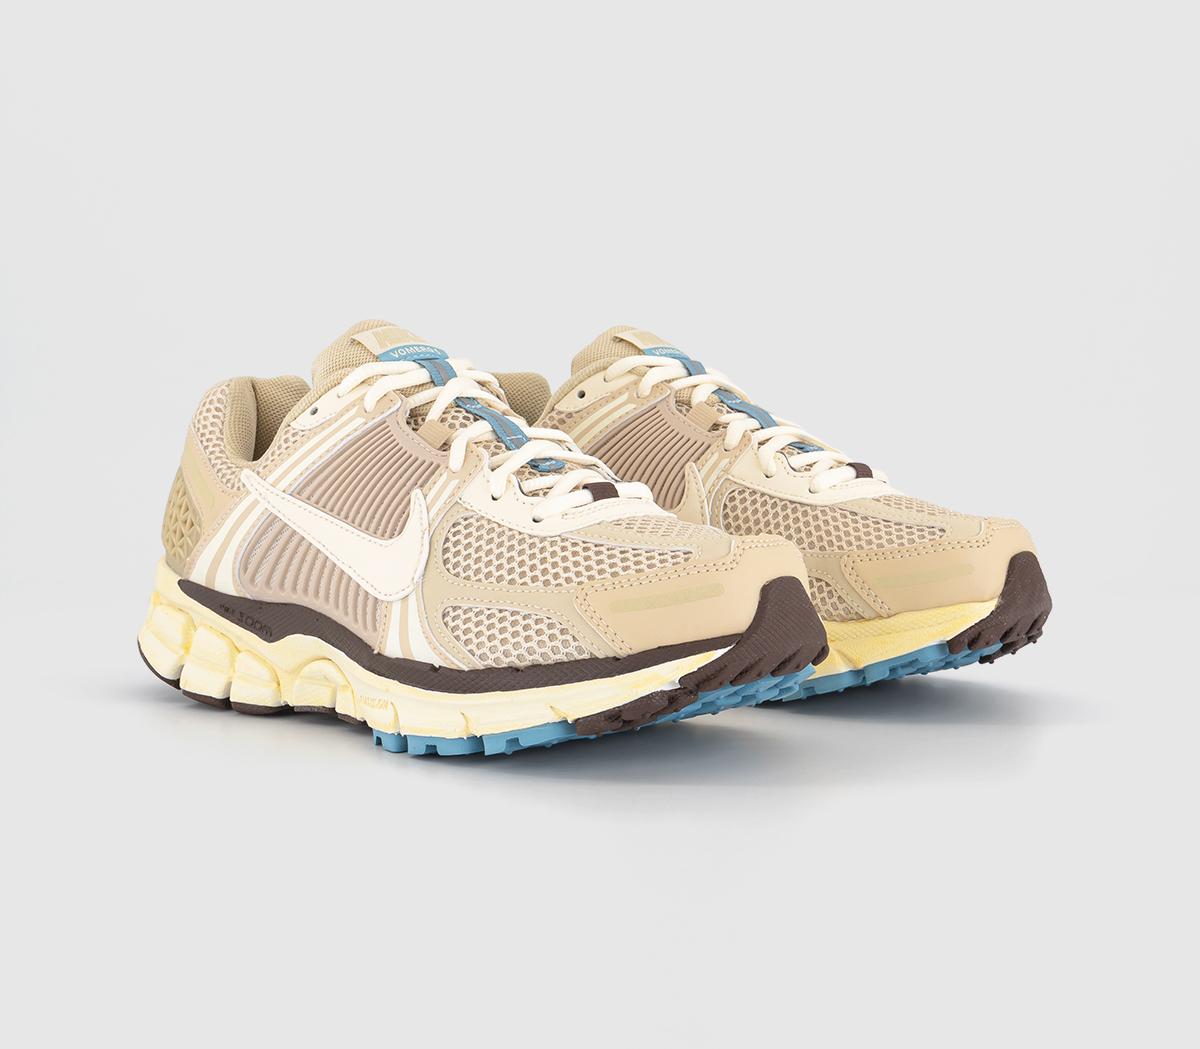 Nike Womens Zoom Vomero 5 Trainers Oatmeal Pale Ivory Sail Light Chocolate Worn Blue Natural, 4